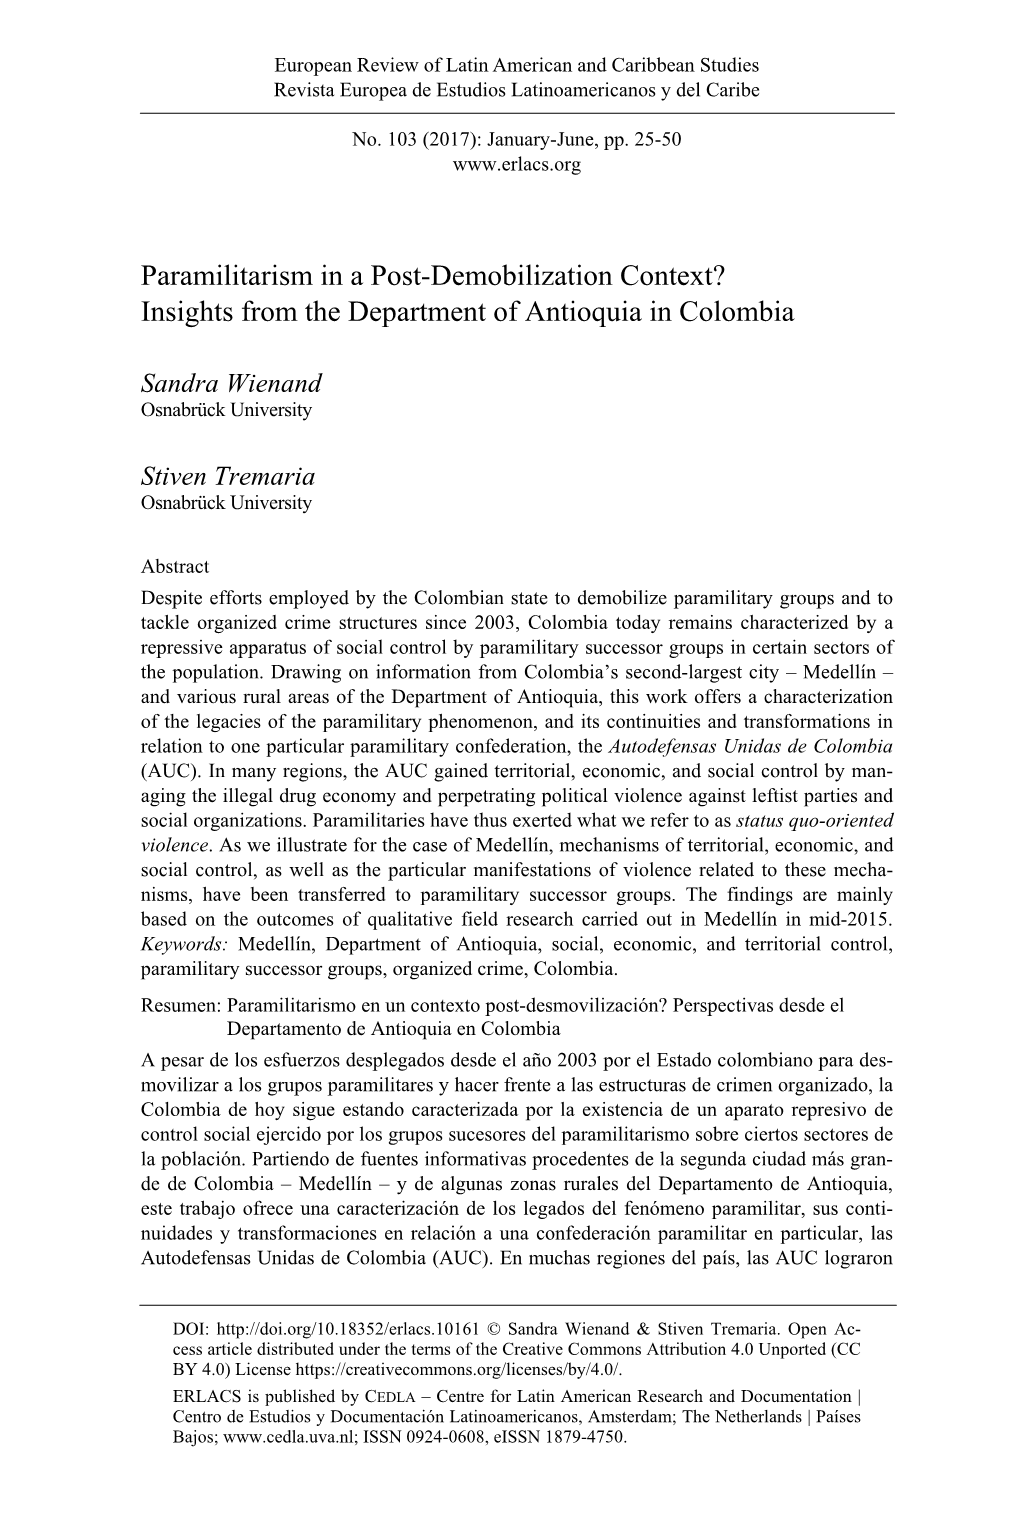 Paramilitarism in a Post-Demobilization Context? Insights from the Department of Antioquia in Colombia